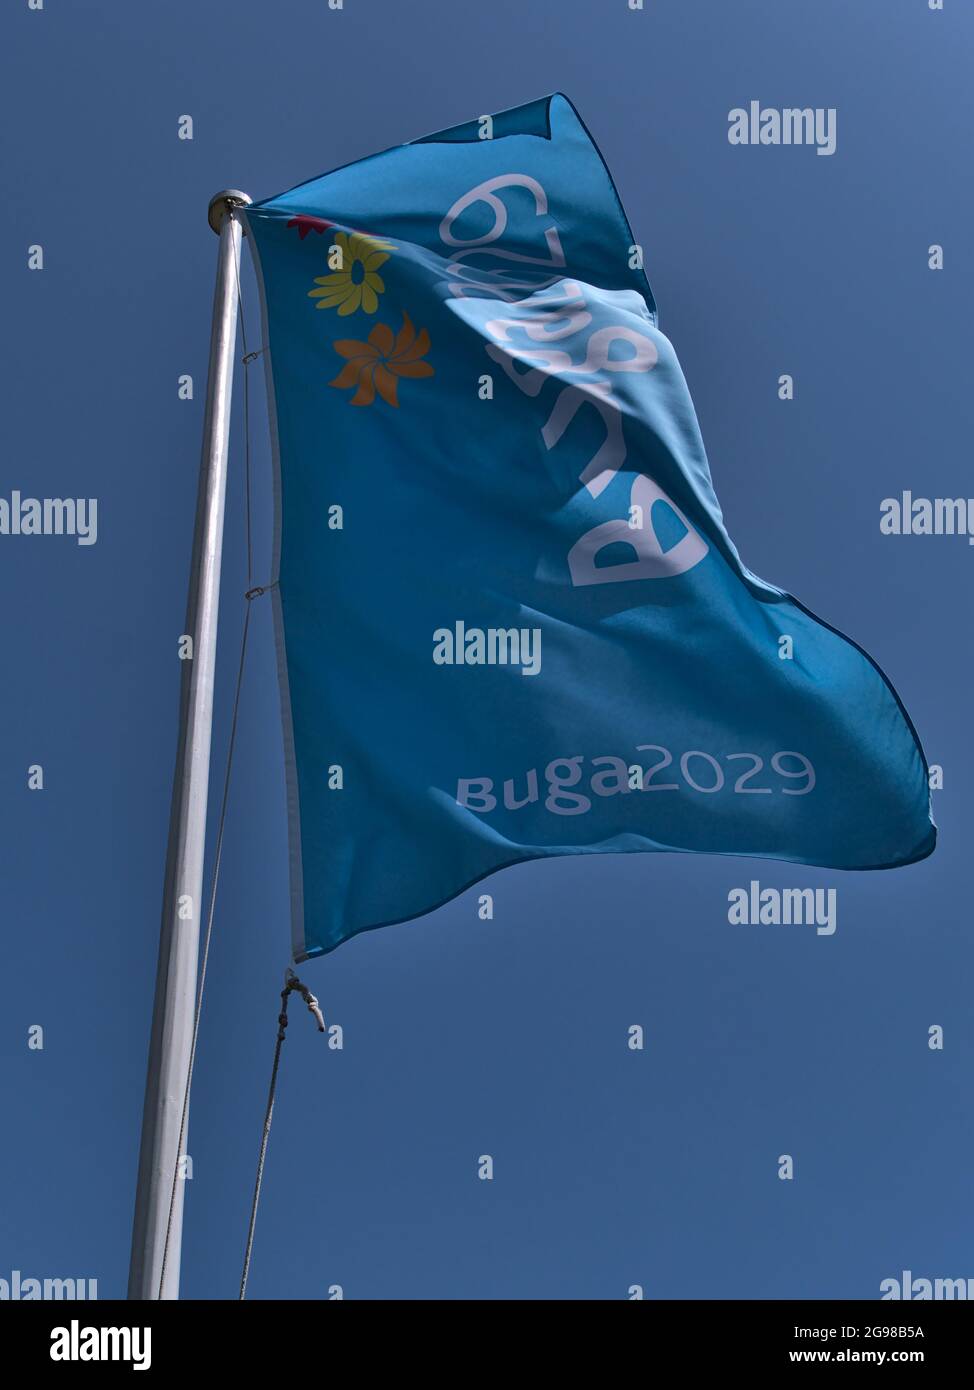 Low angle view of flagpole with light blue flag advertising for Bundesgartenschau (BuGa) 2029, a biennial horticulture show. Stock Photo